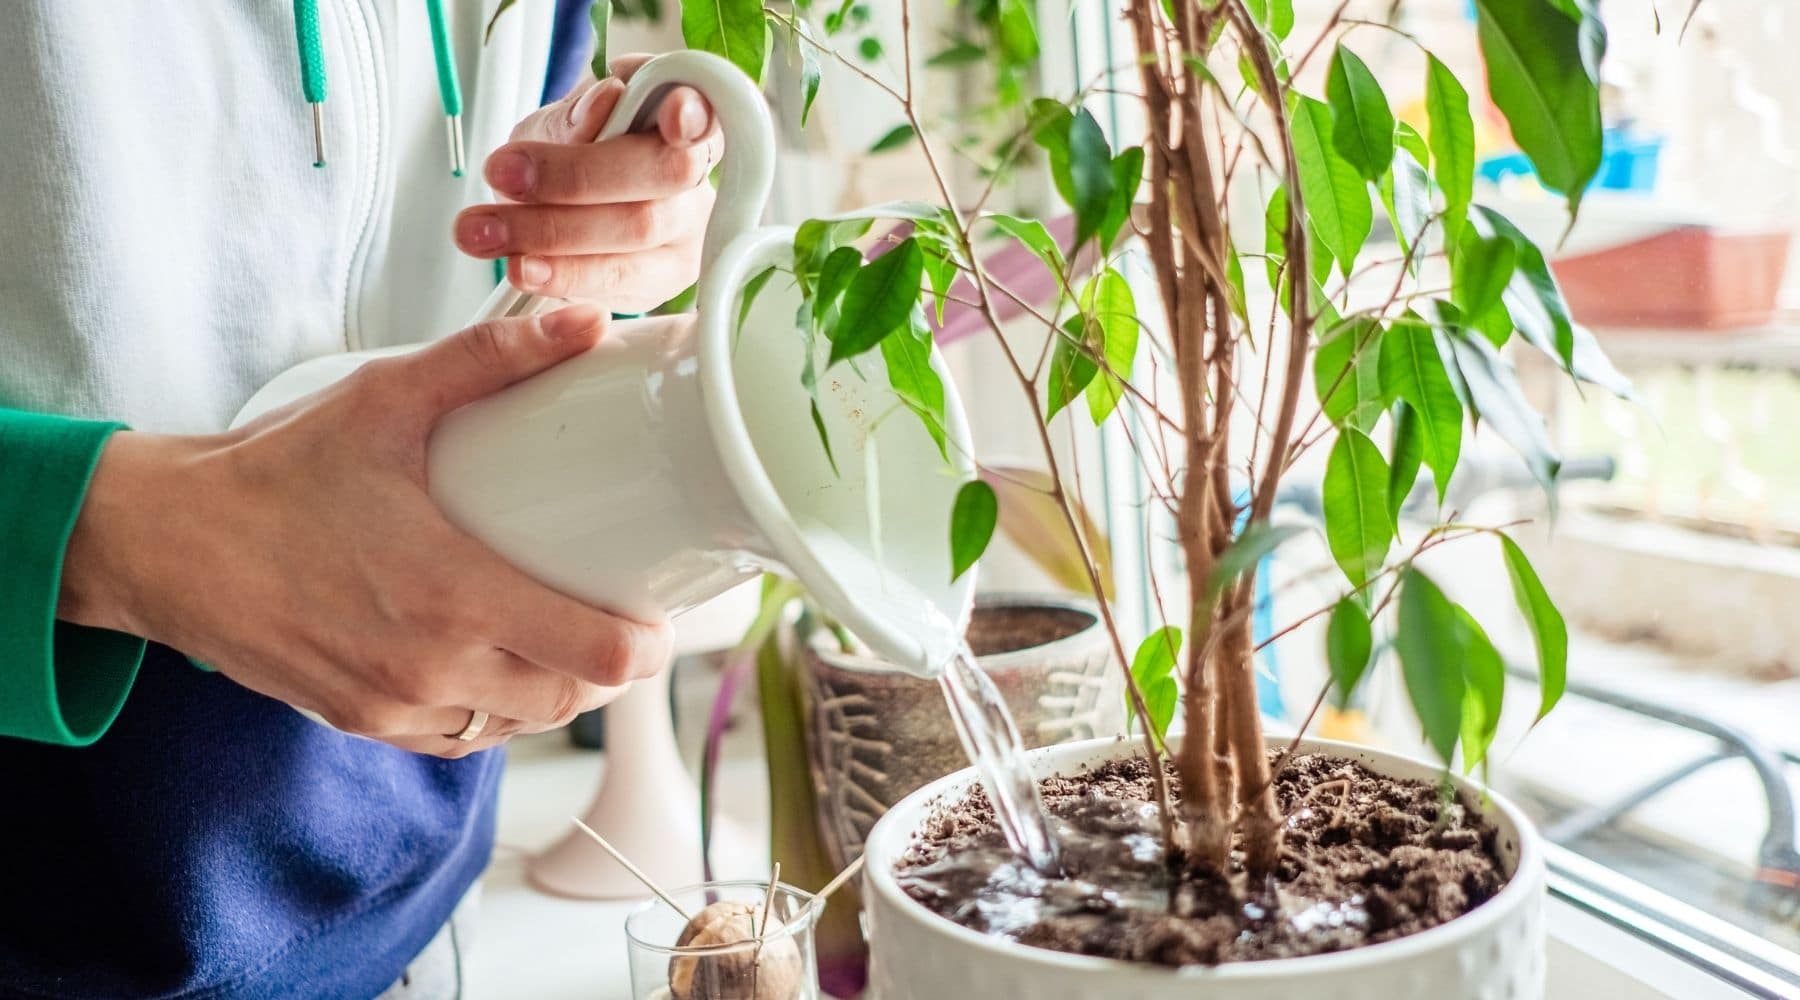 Indoor Plant Care: 9 Common Houseplant Mistakes to Avoid - Overwatering